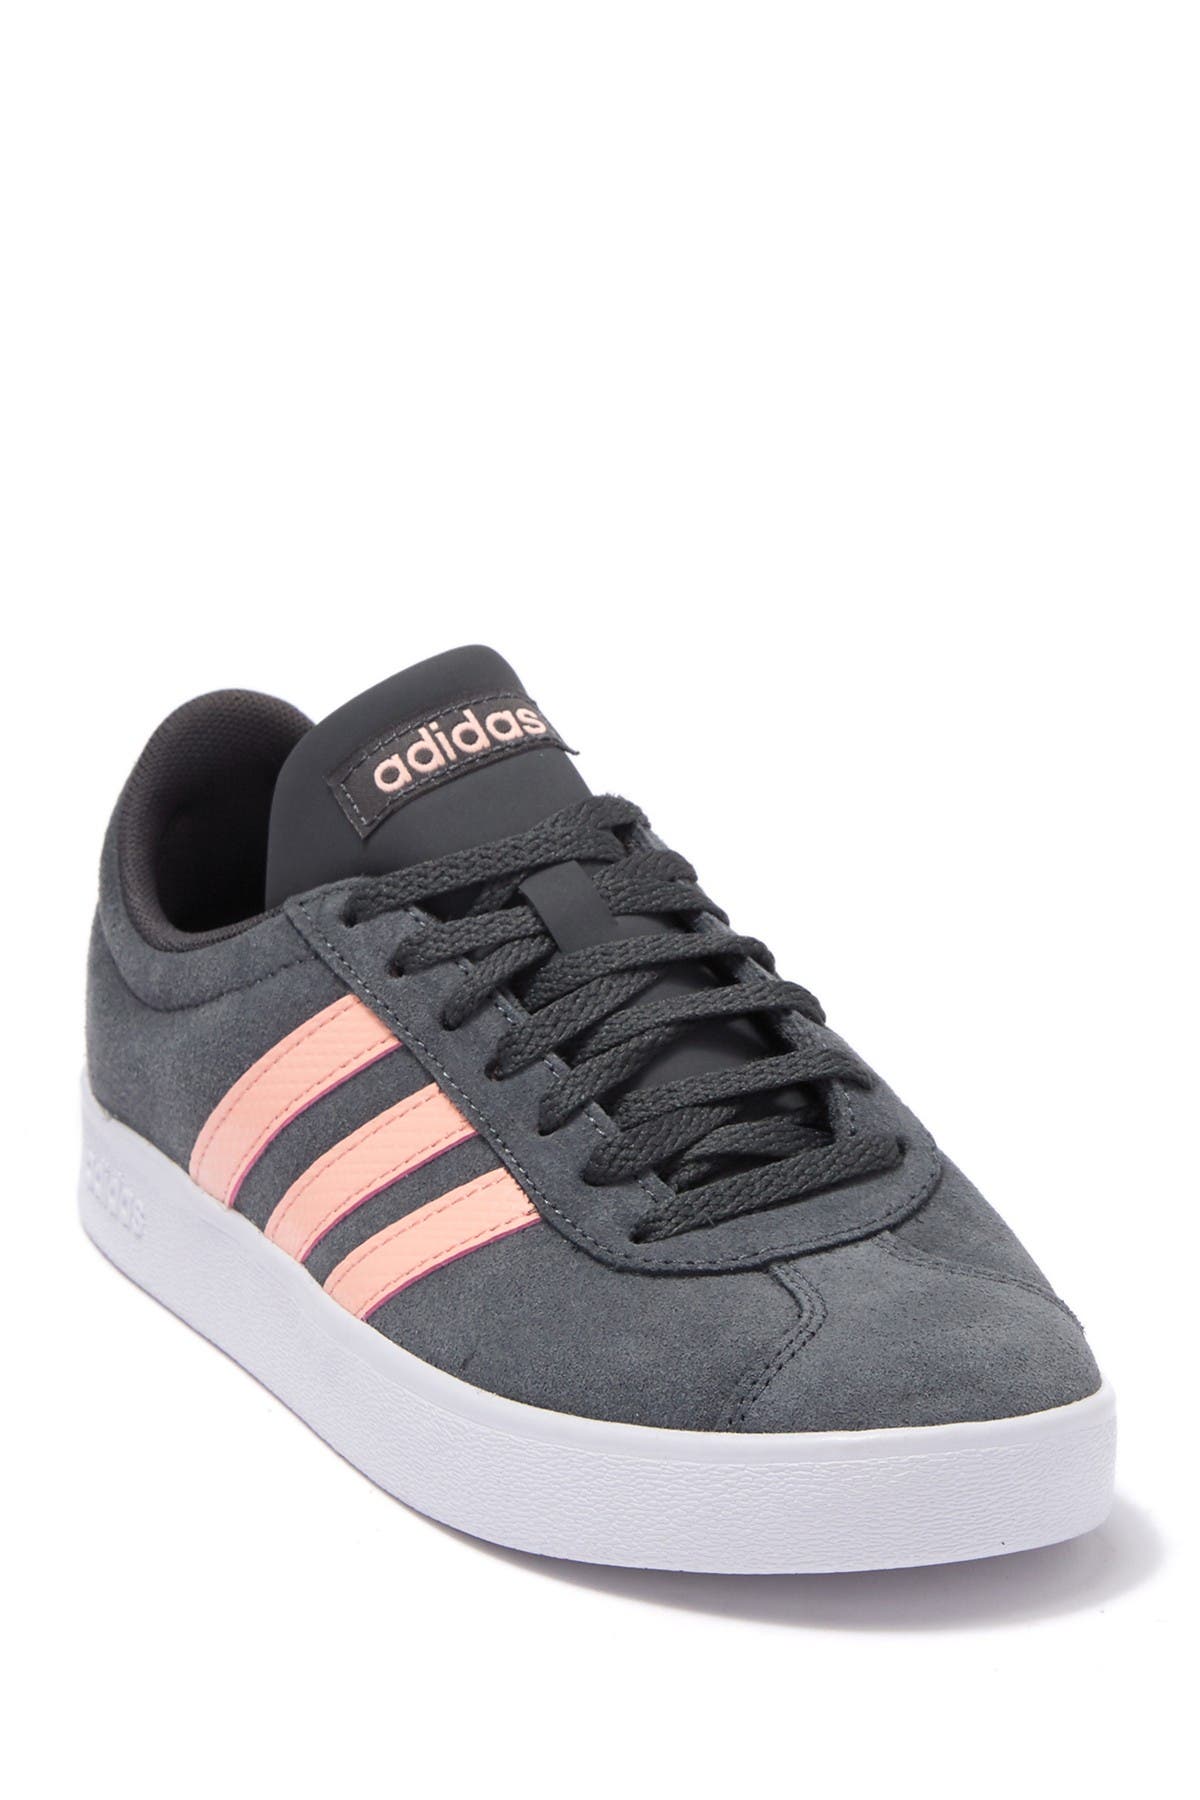 adidas vl court suede trainers